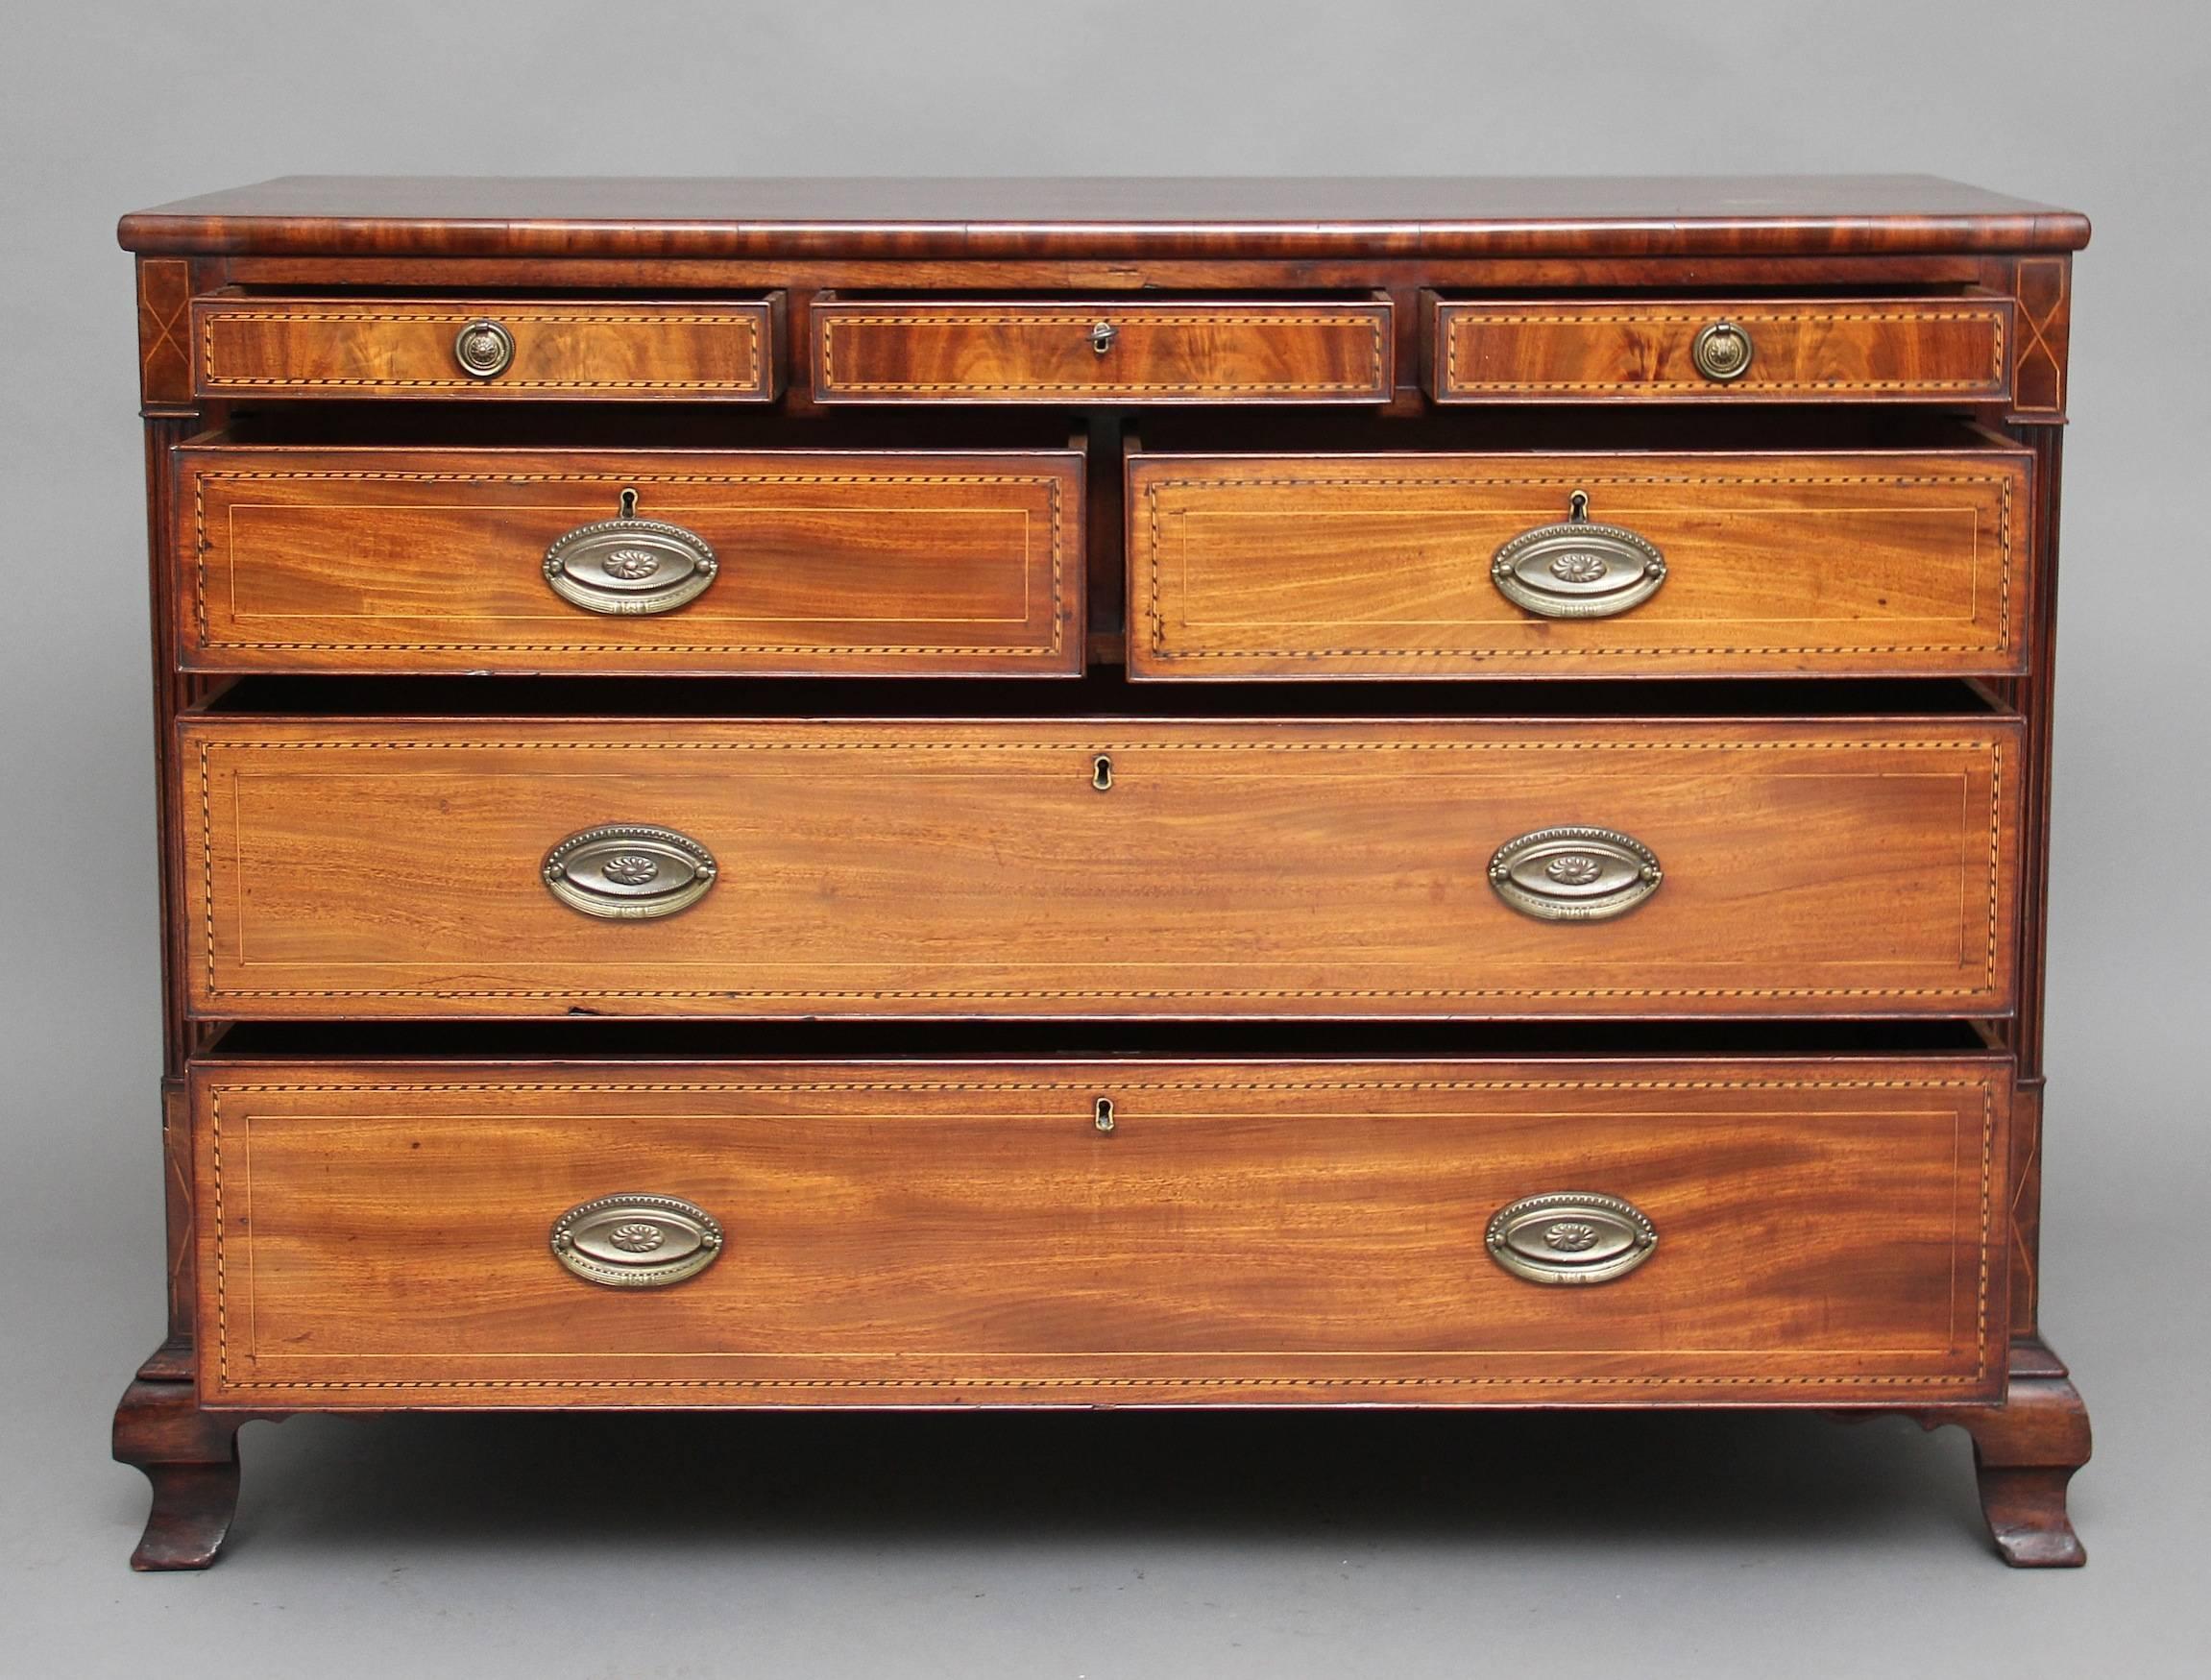 Early 19th century mahogany and chequer line-inlaid chest of drawers, the rectangular top above three small drawers with brass ring handles, and below a combination of two short over two long graduated drawers between fluted stiles, standing on ogee